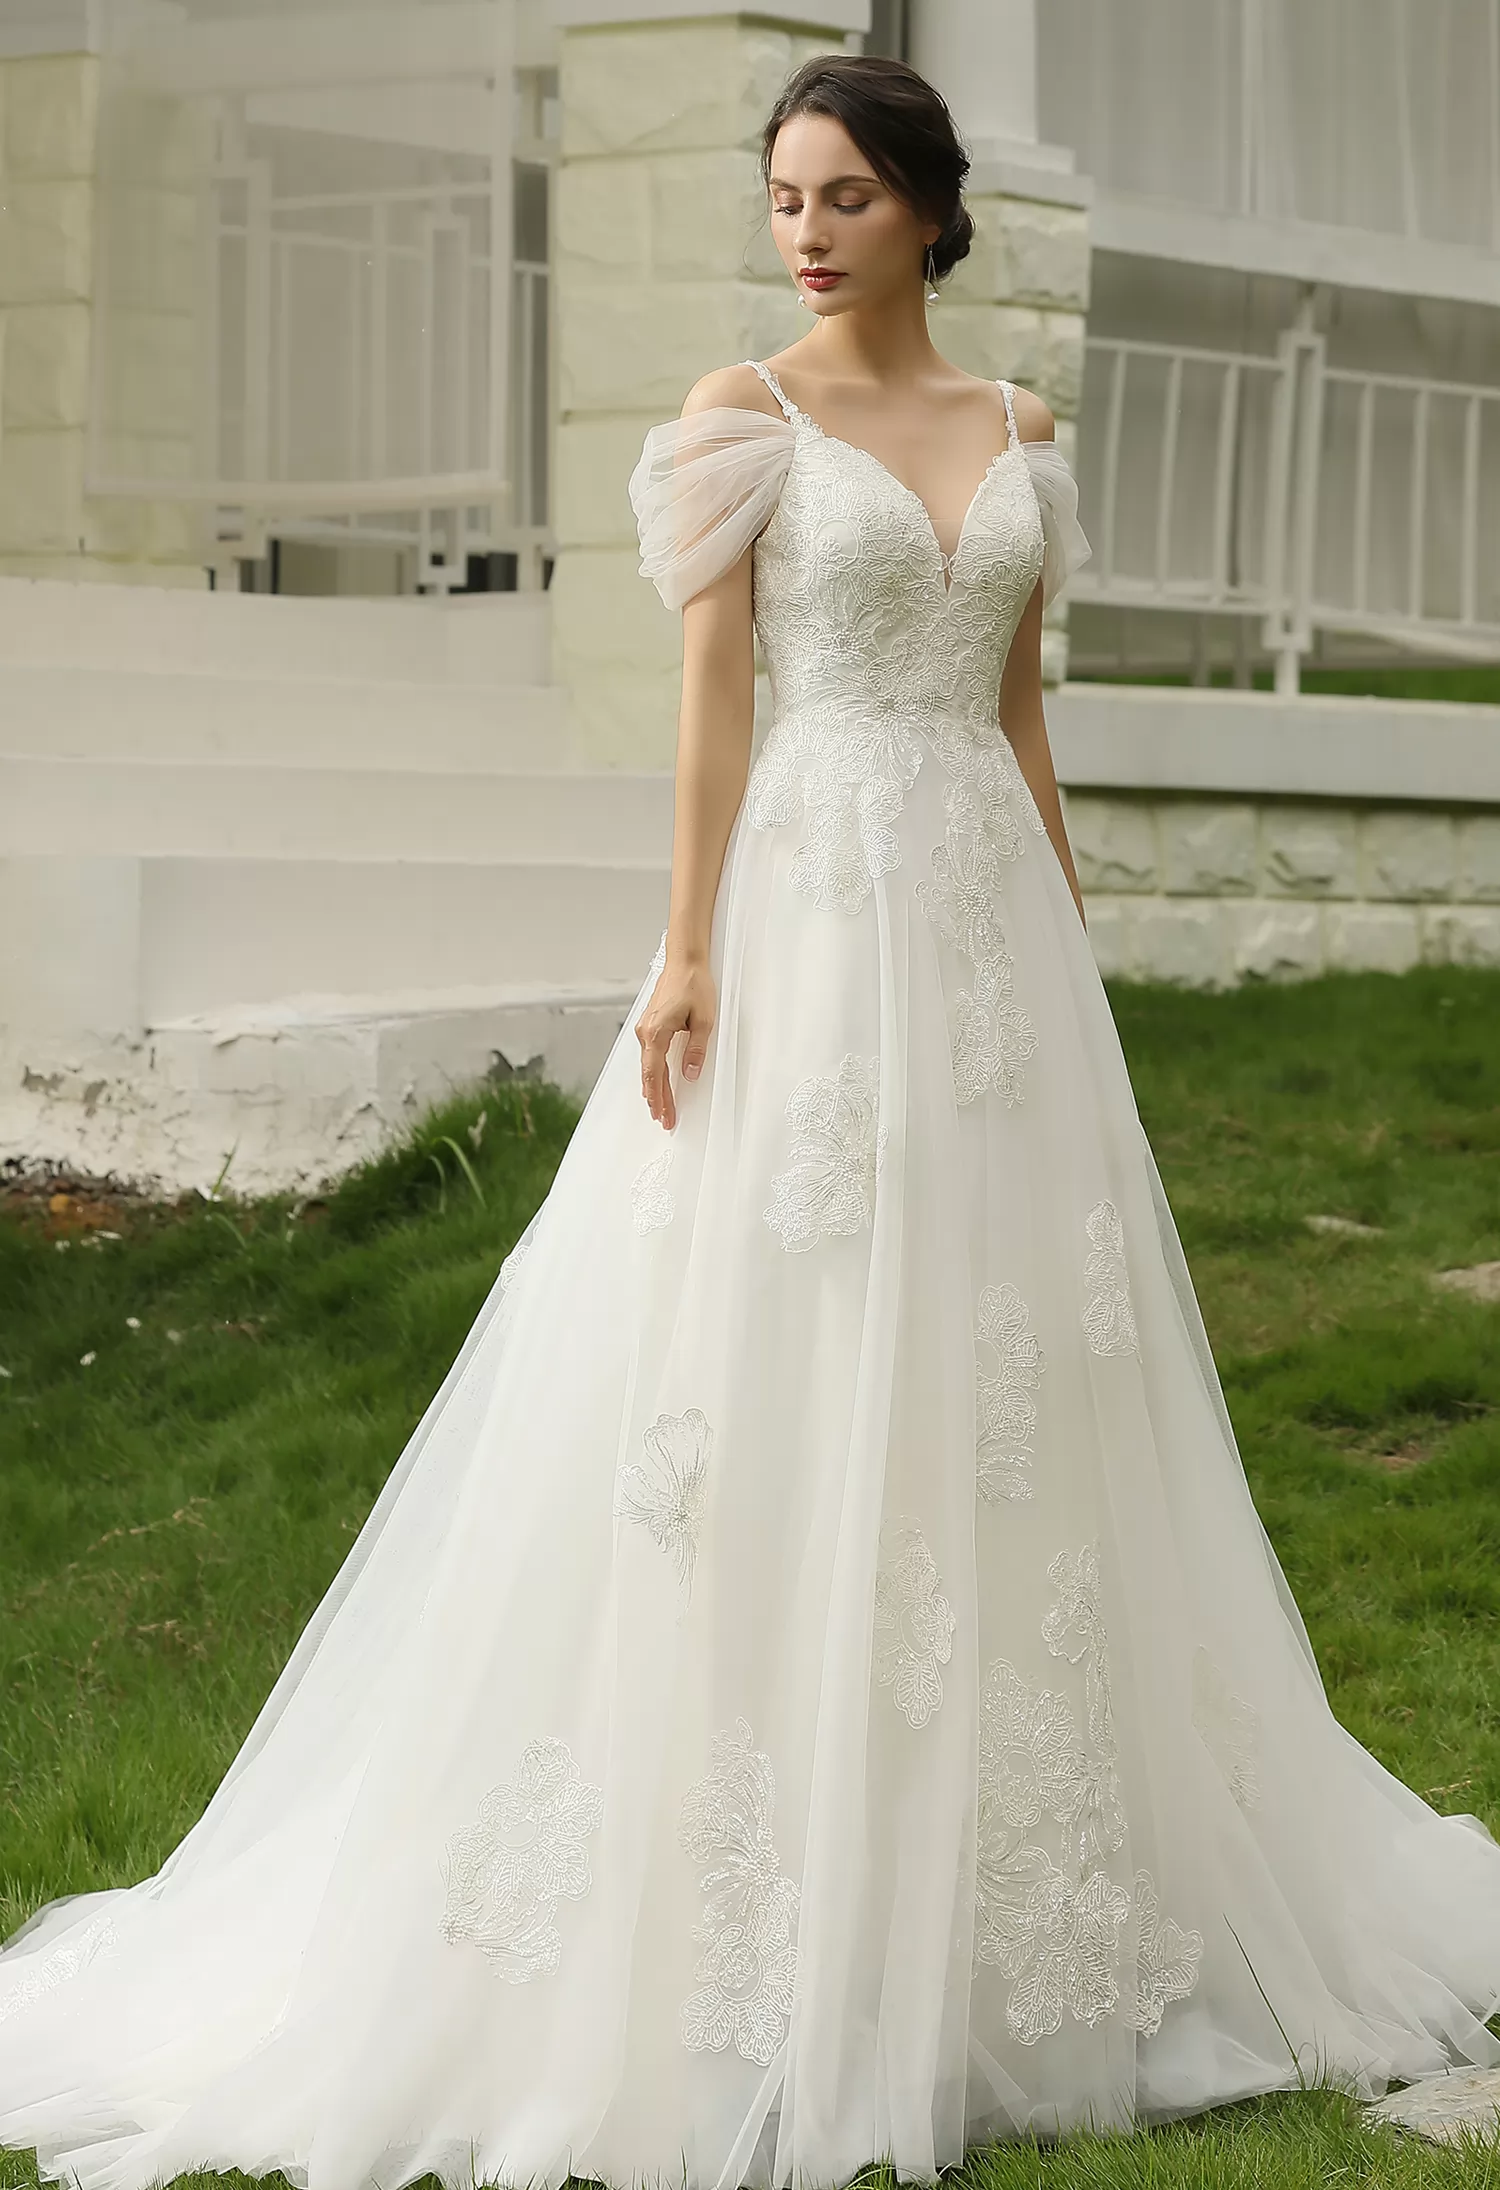 Romantic Glittery  Lace Bridal Gown With Detachable Straps